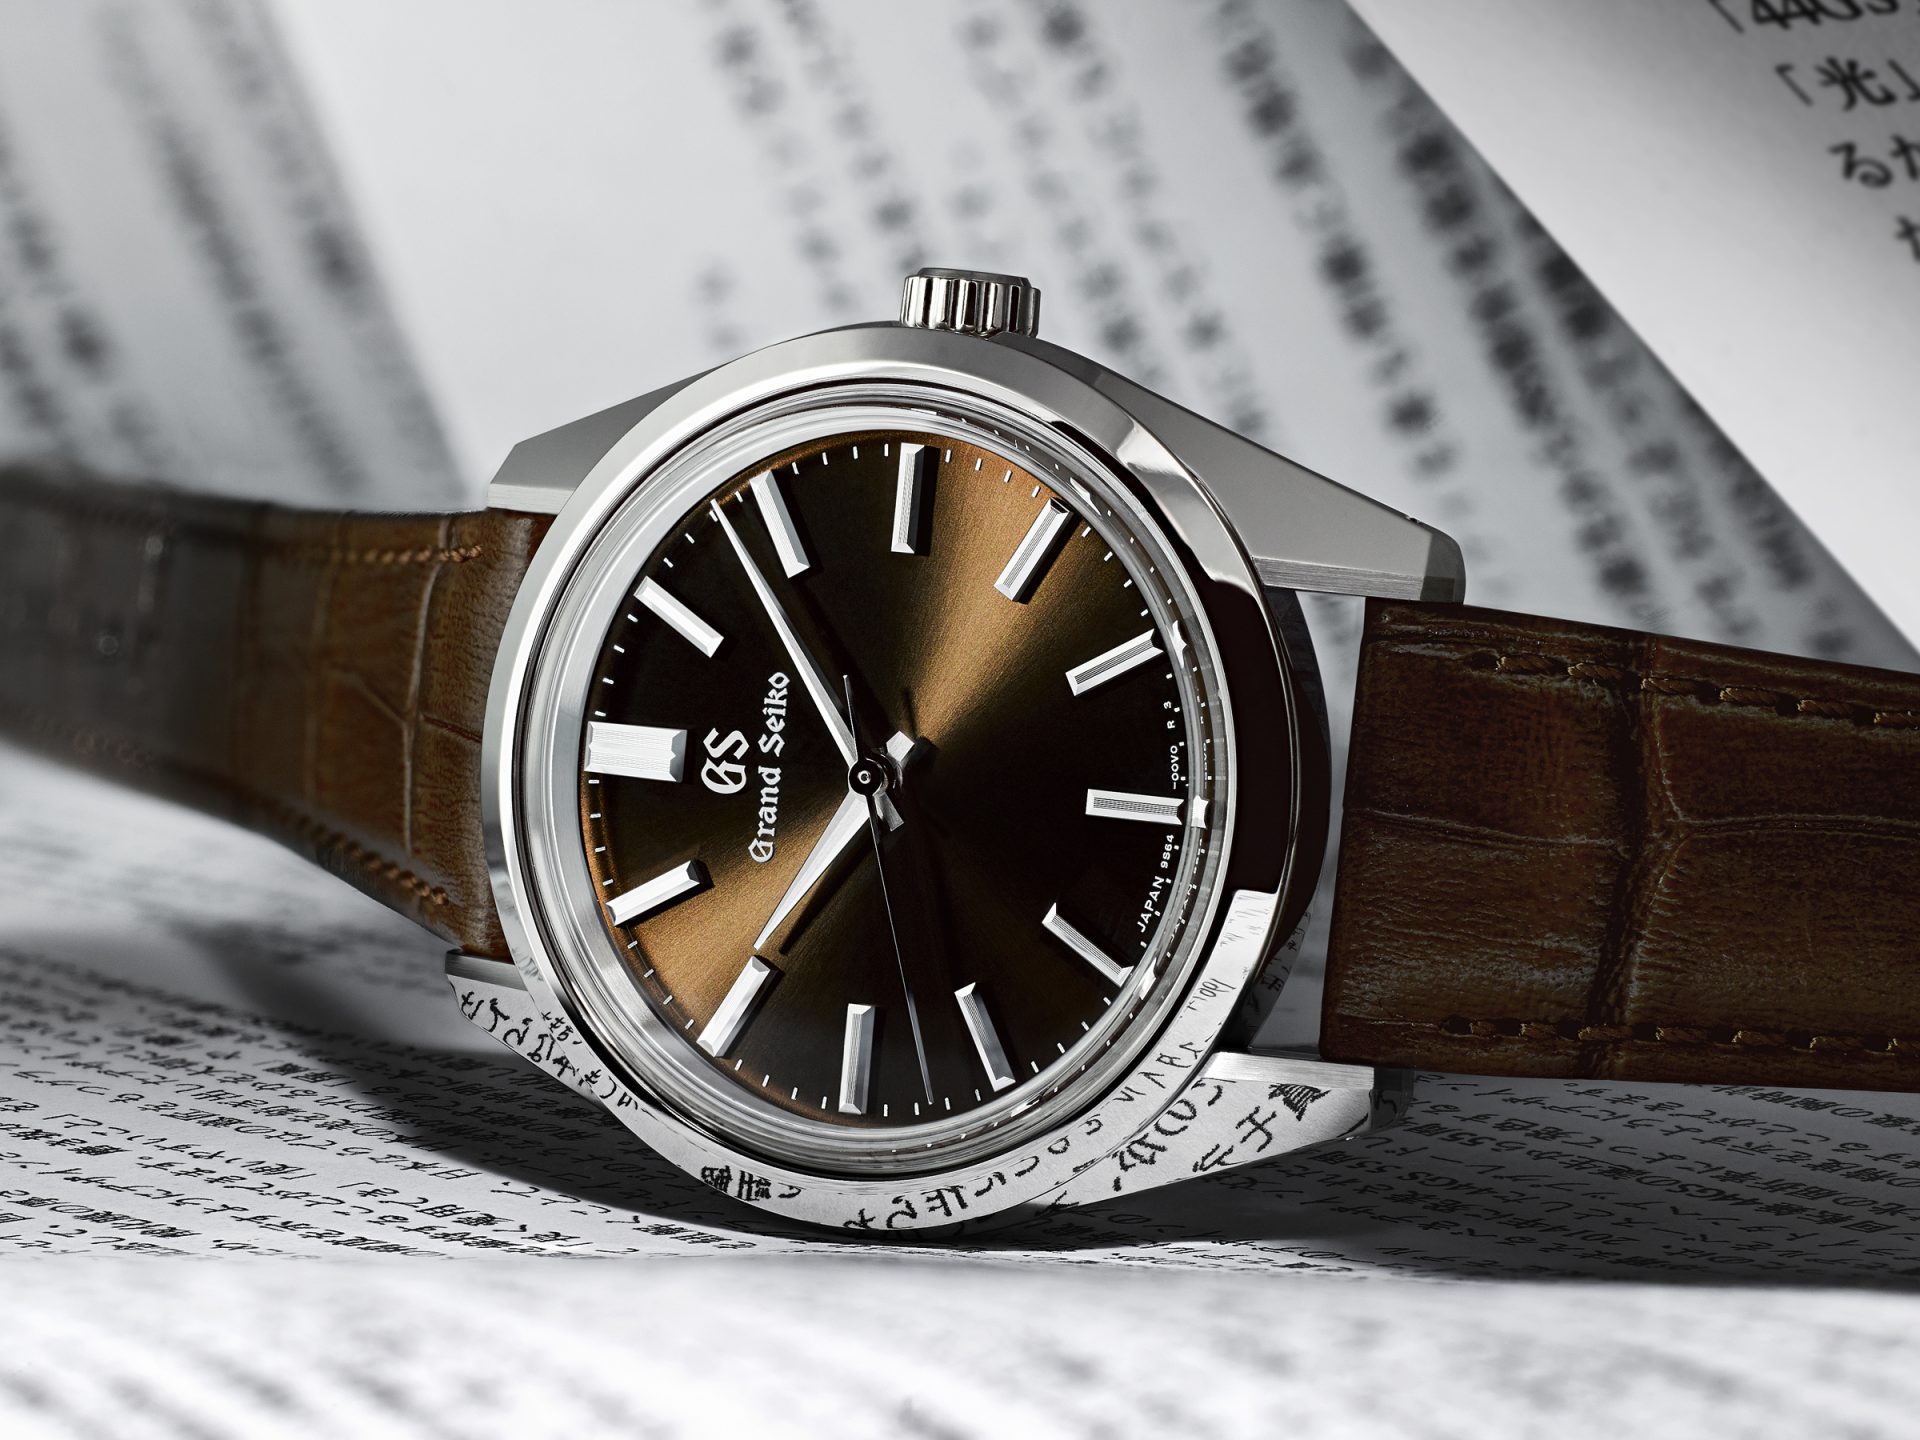 Grand Seiko Takes Inspiration From The Earth And Sky For Latest 44GS  Heritage Watches